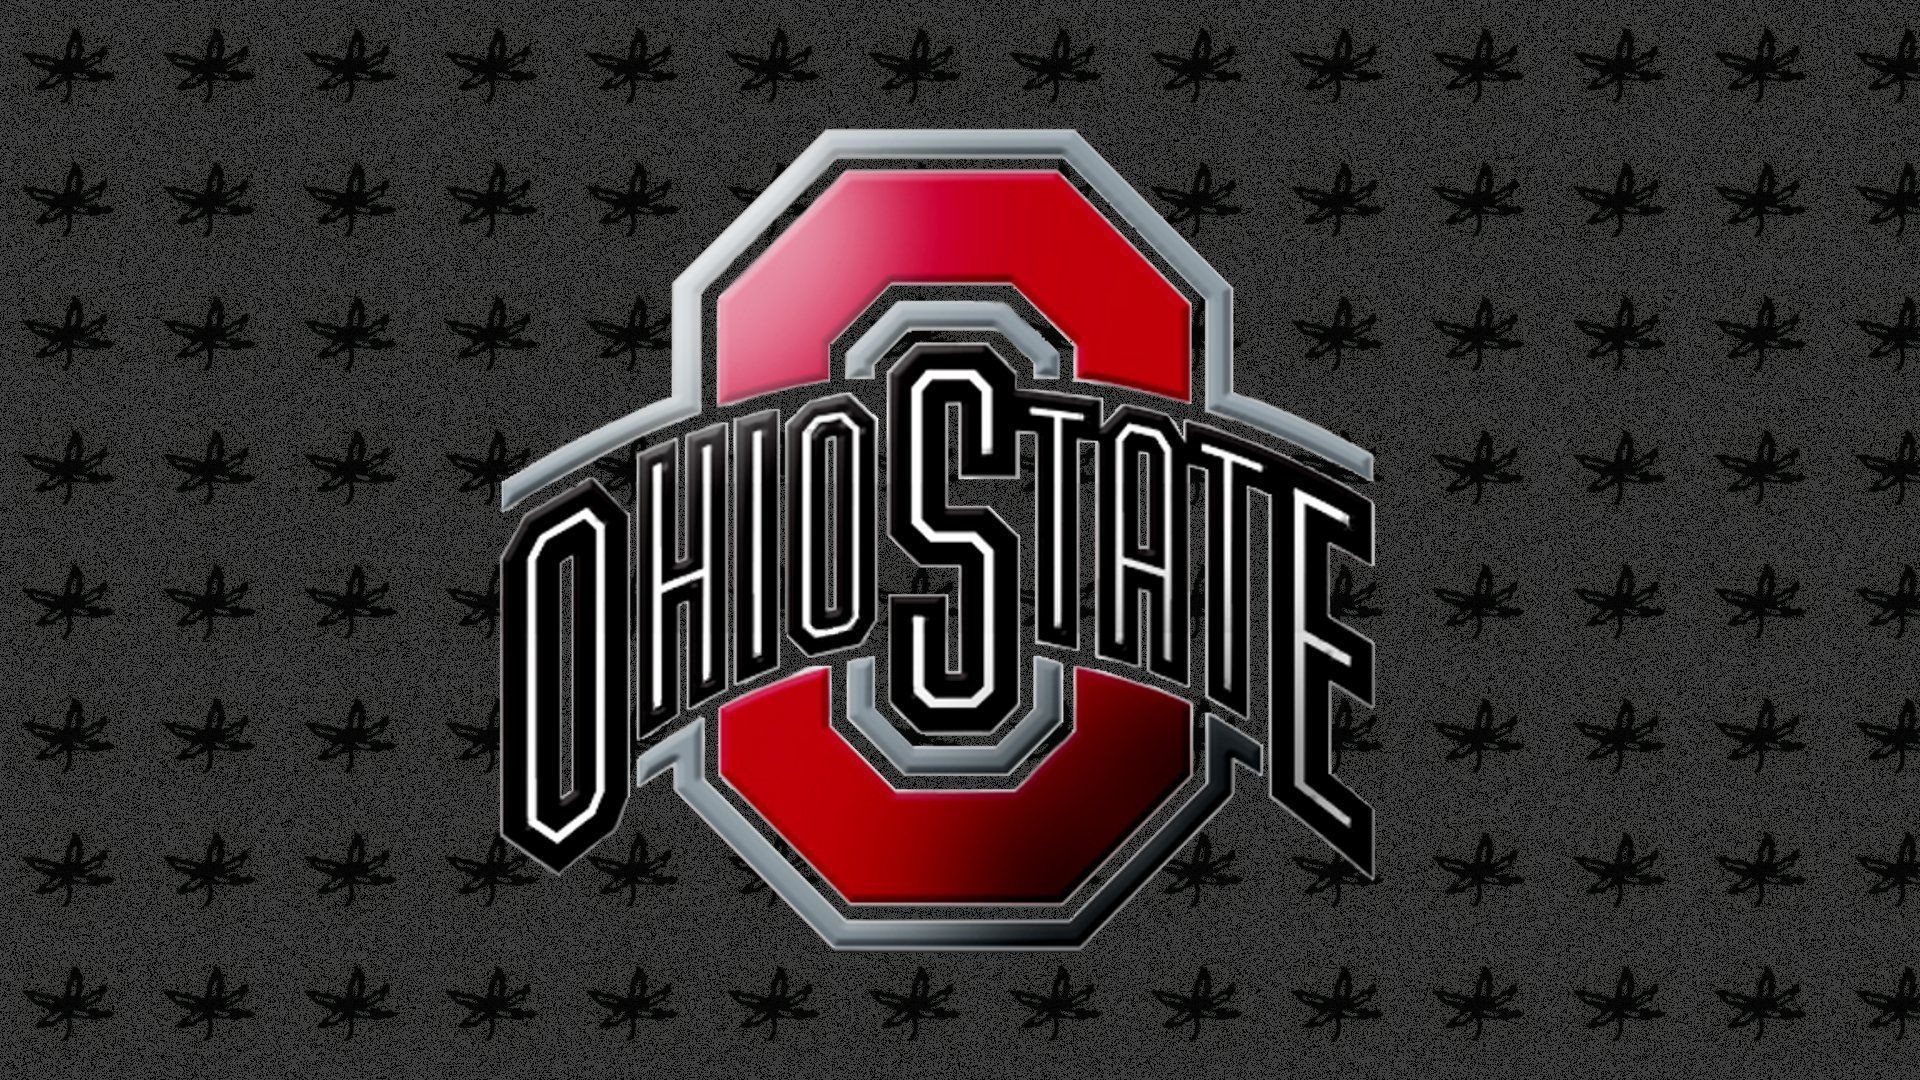 1920x1080 Lovely Ohio State Football Logo Pictures 49 On Company Logo With Ohio State Football  Logo Pictures